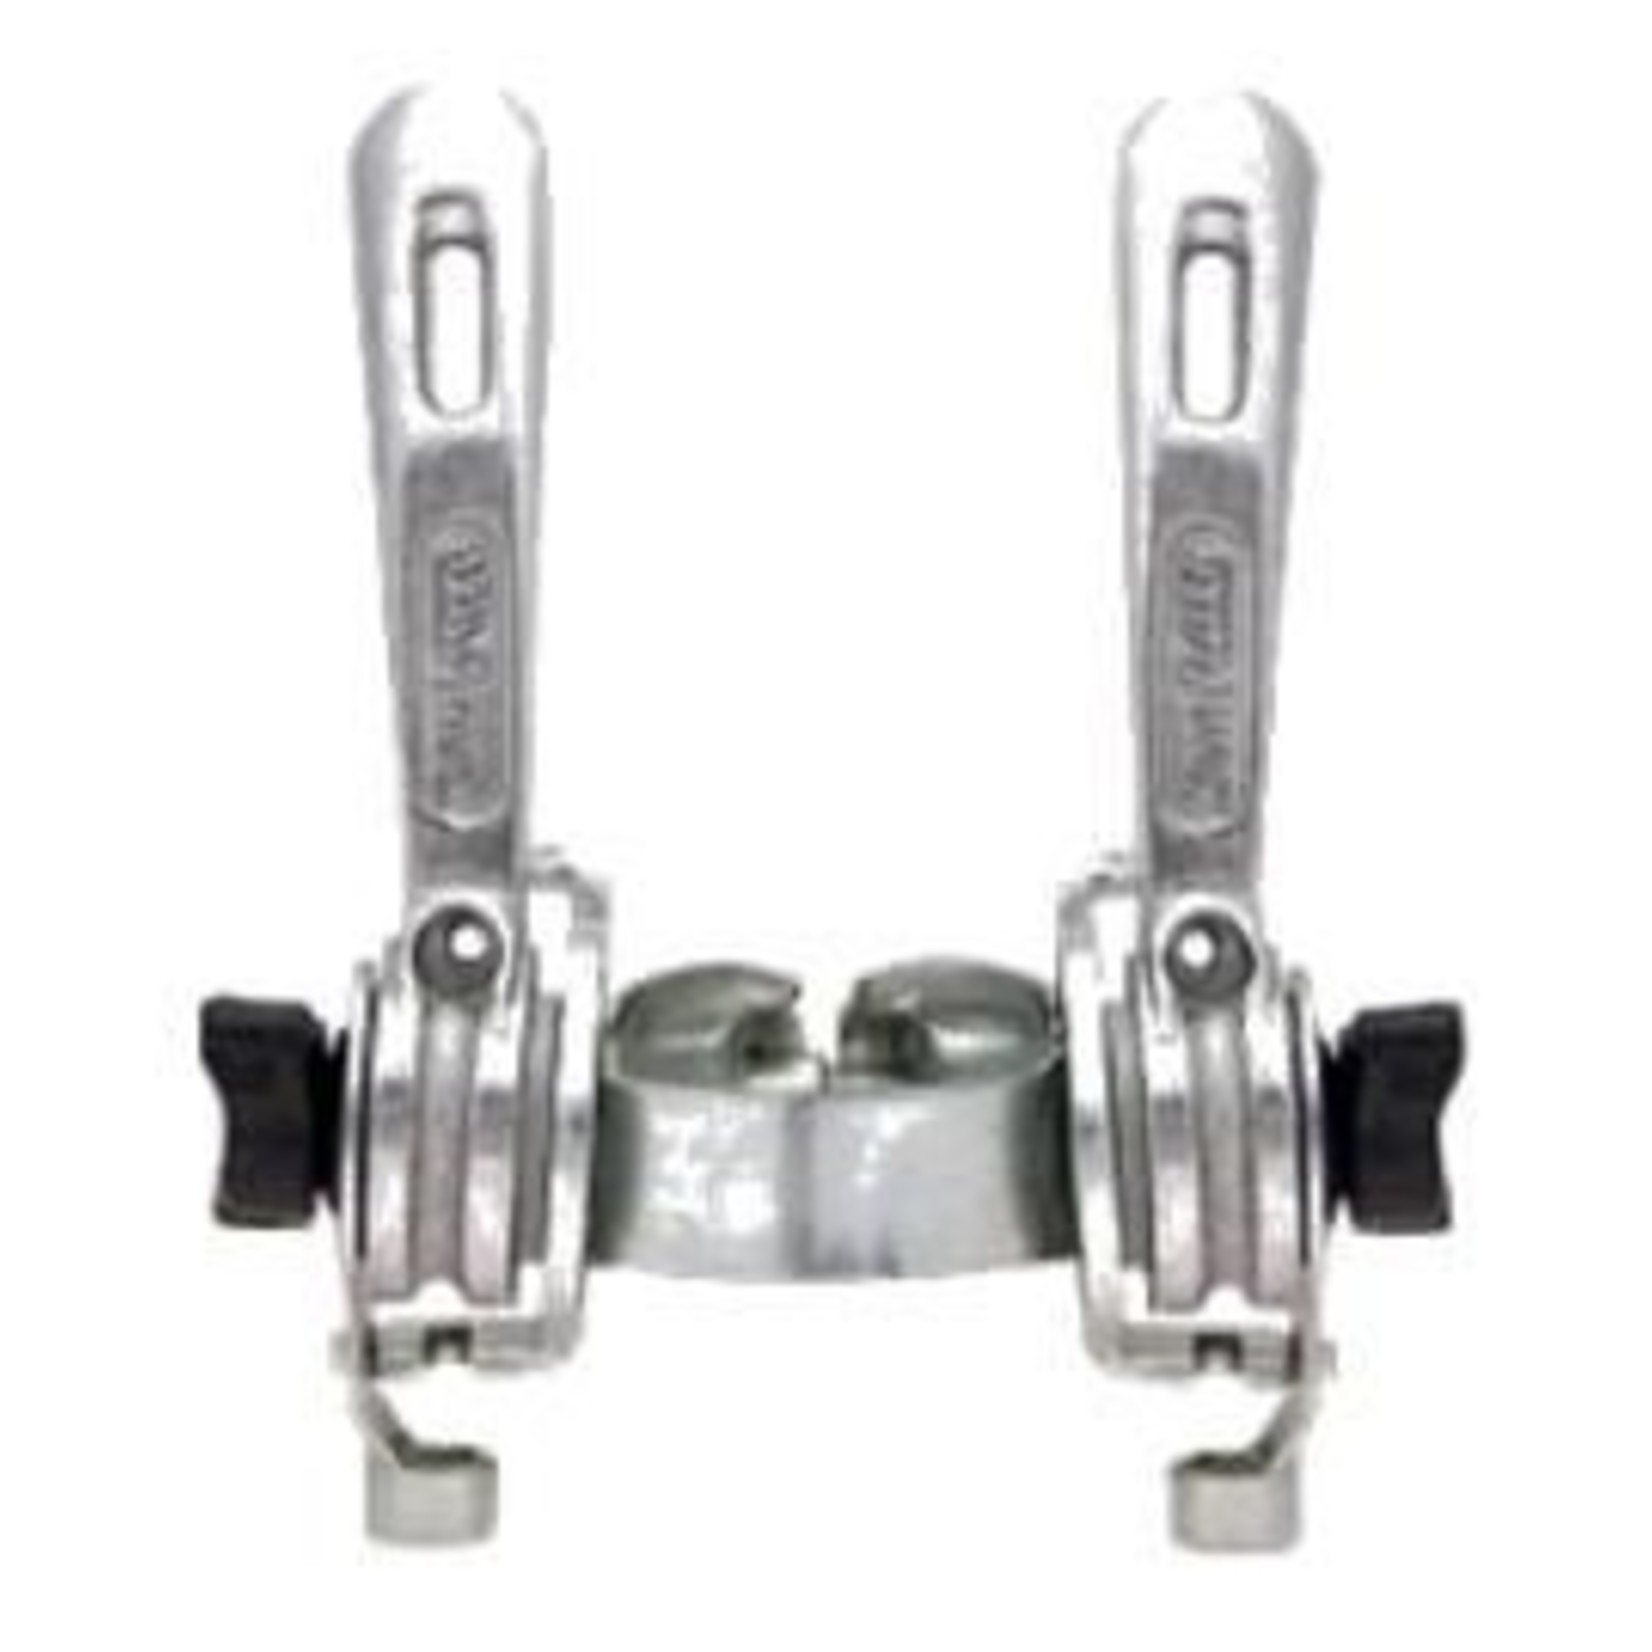 Incomex Trading Pty Ltd Sturmey Archer - Bike/Cycling Double Shifter Lever Friction - Fits1-1/8Down Tube